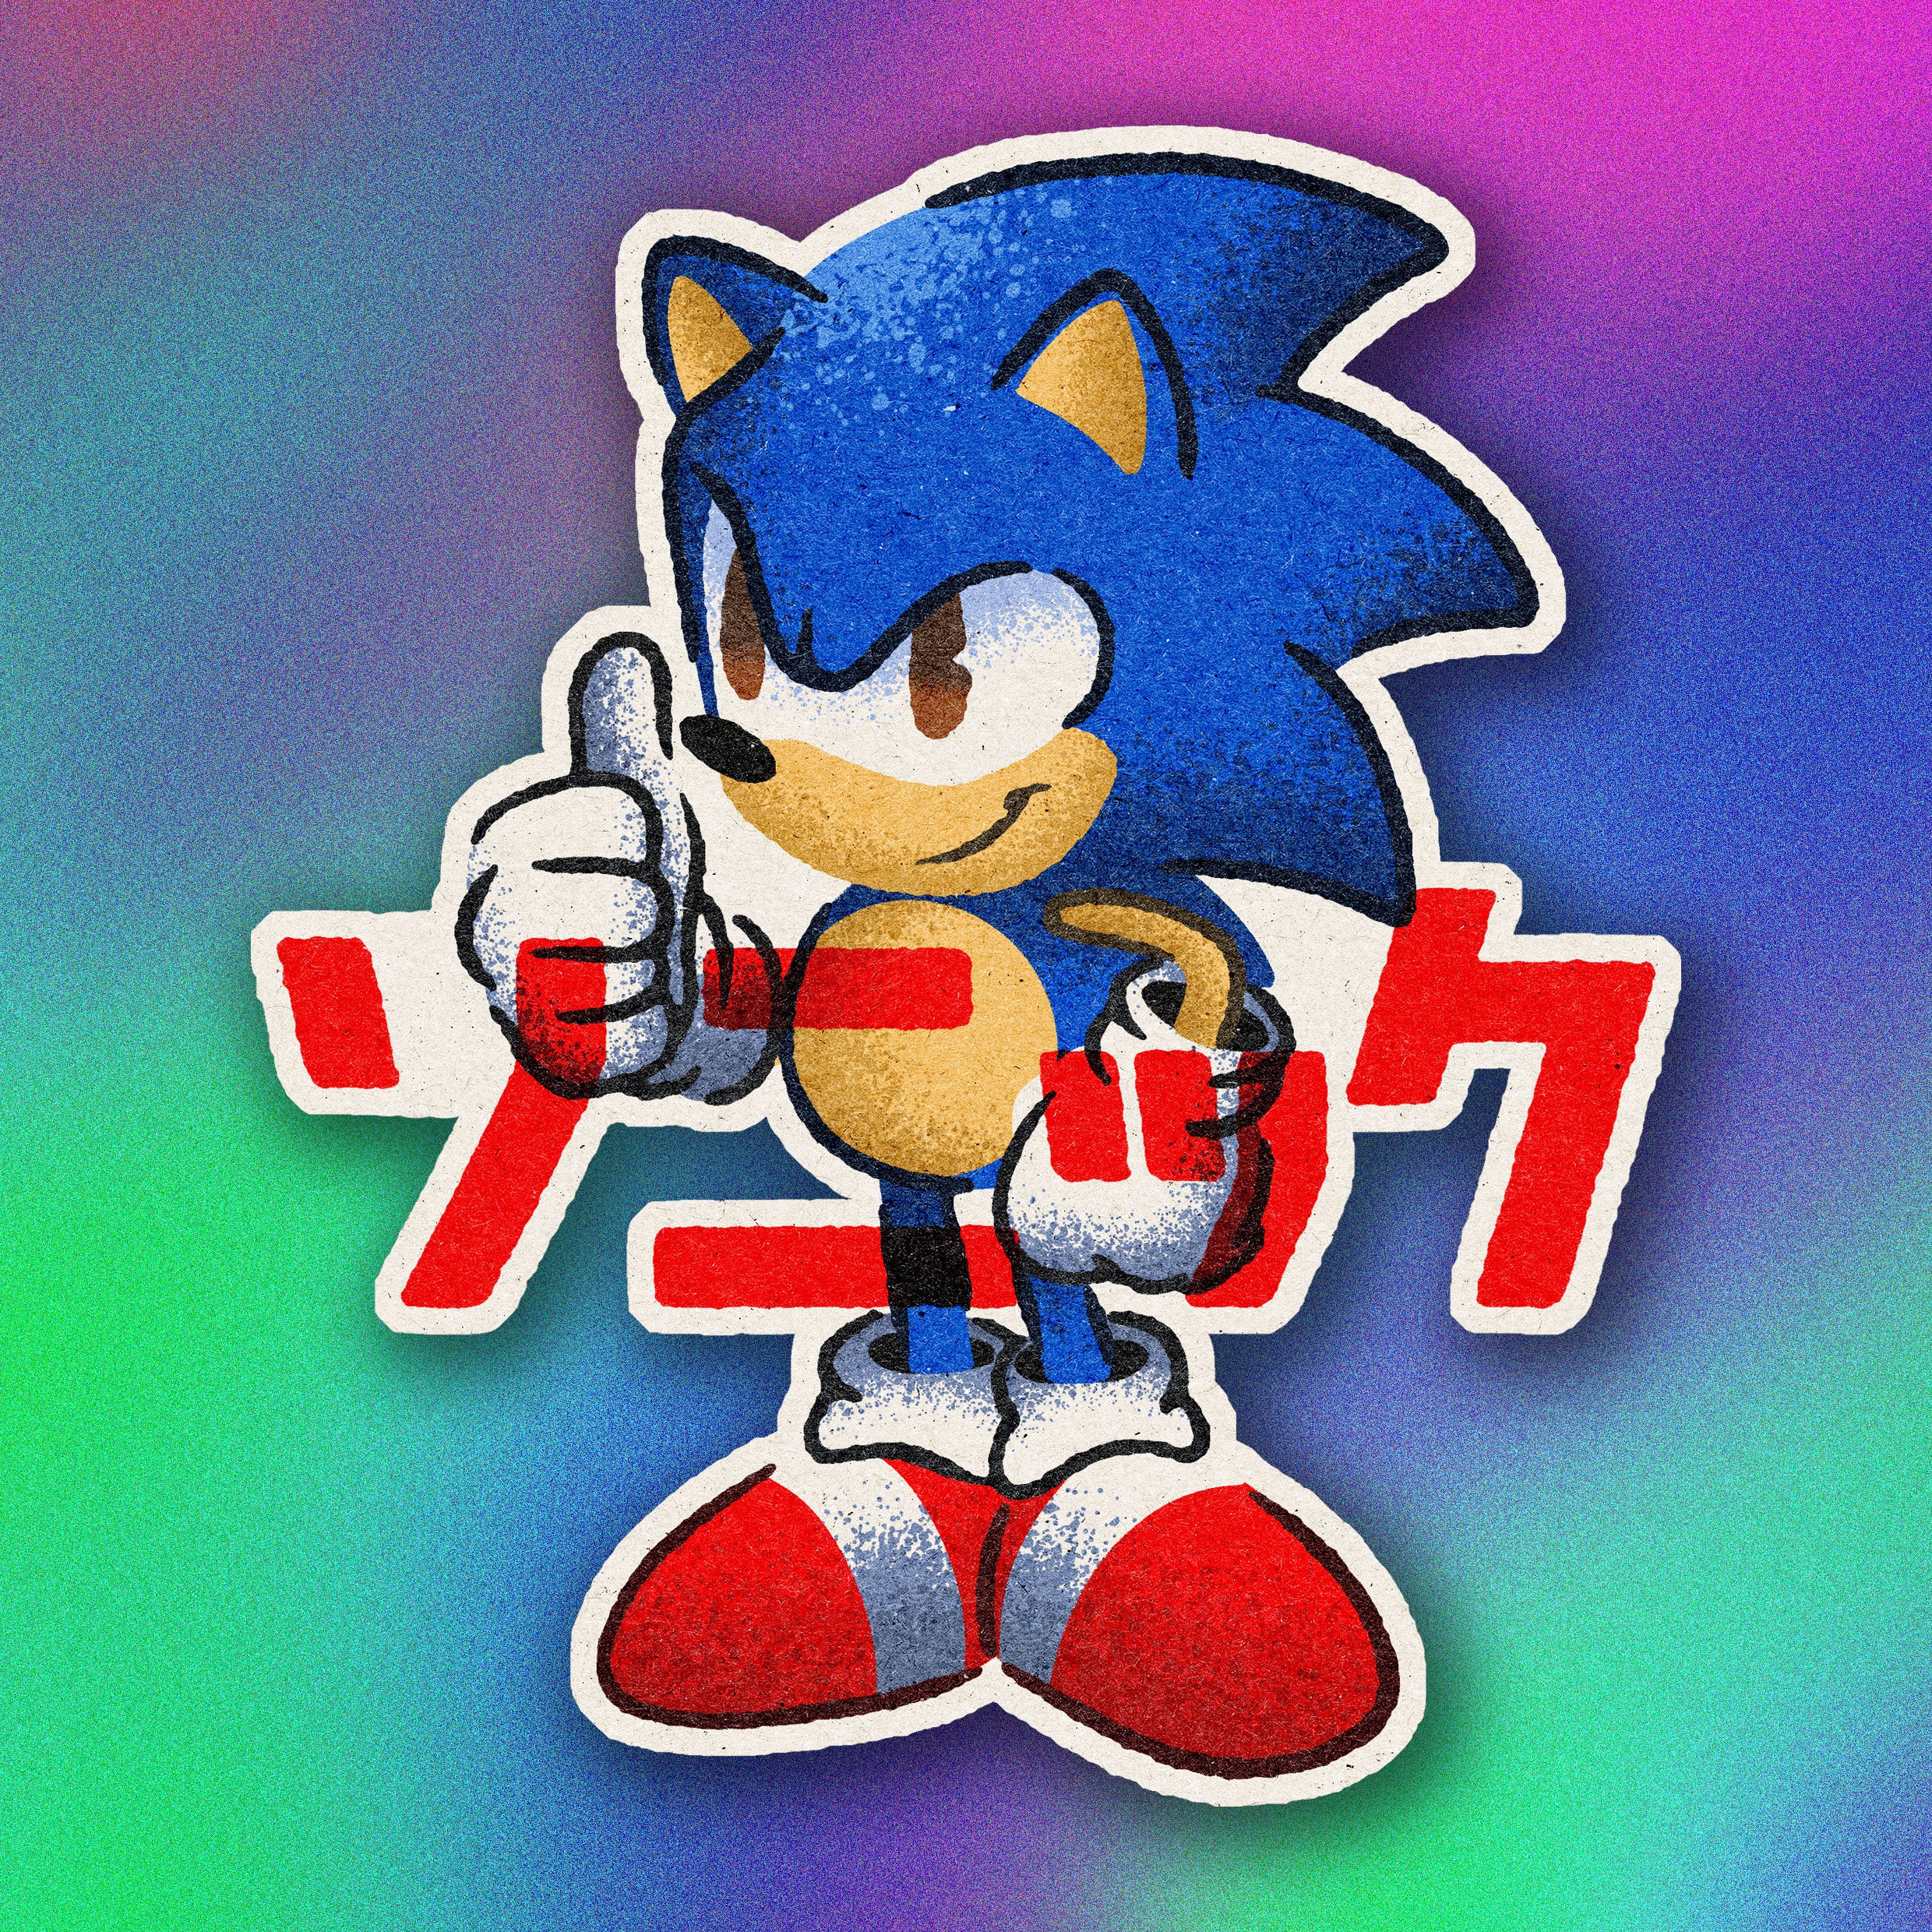 Sonic The Hedgehog Classic #1 3- 6 Vinyl Decal Stickers